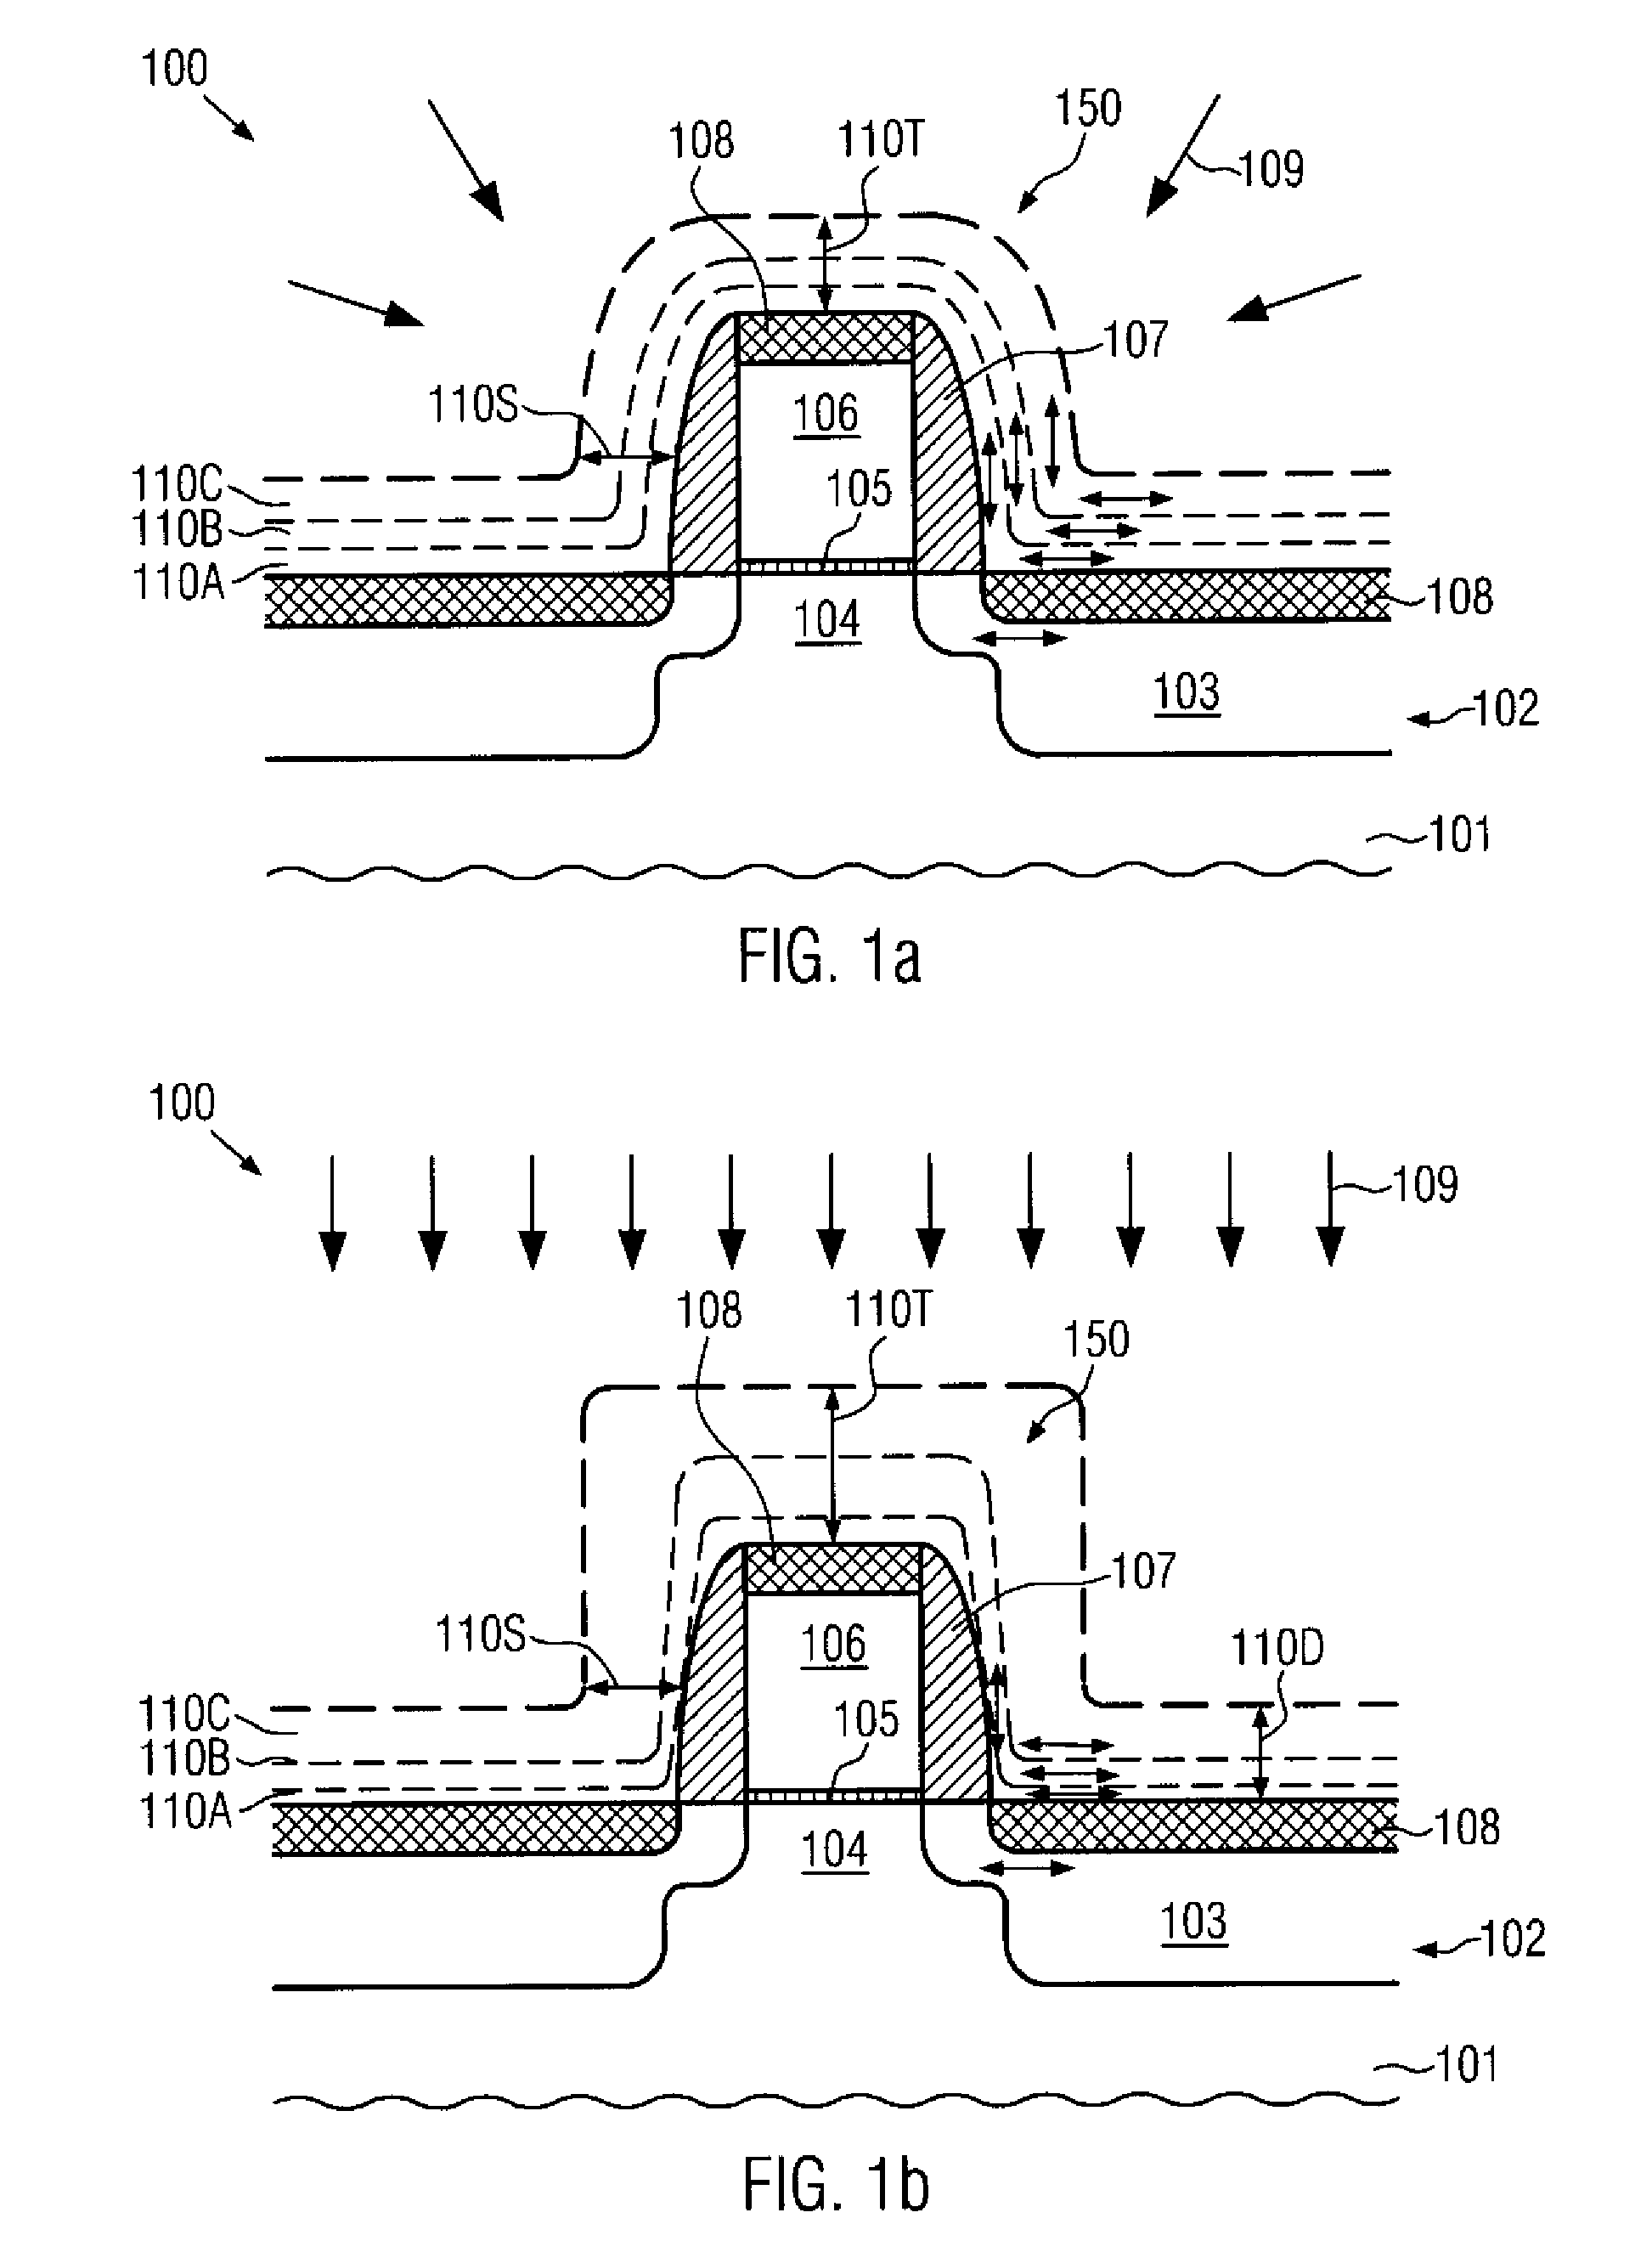 Field effect transistor having a stressed contact etch stop layer with reduced conformality